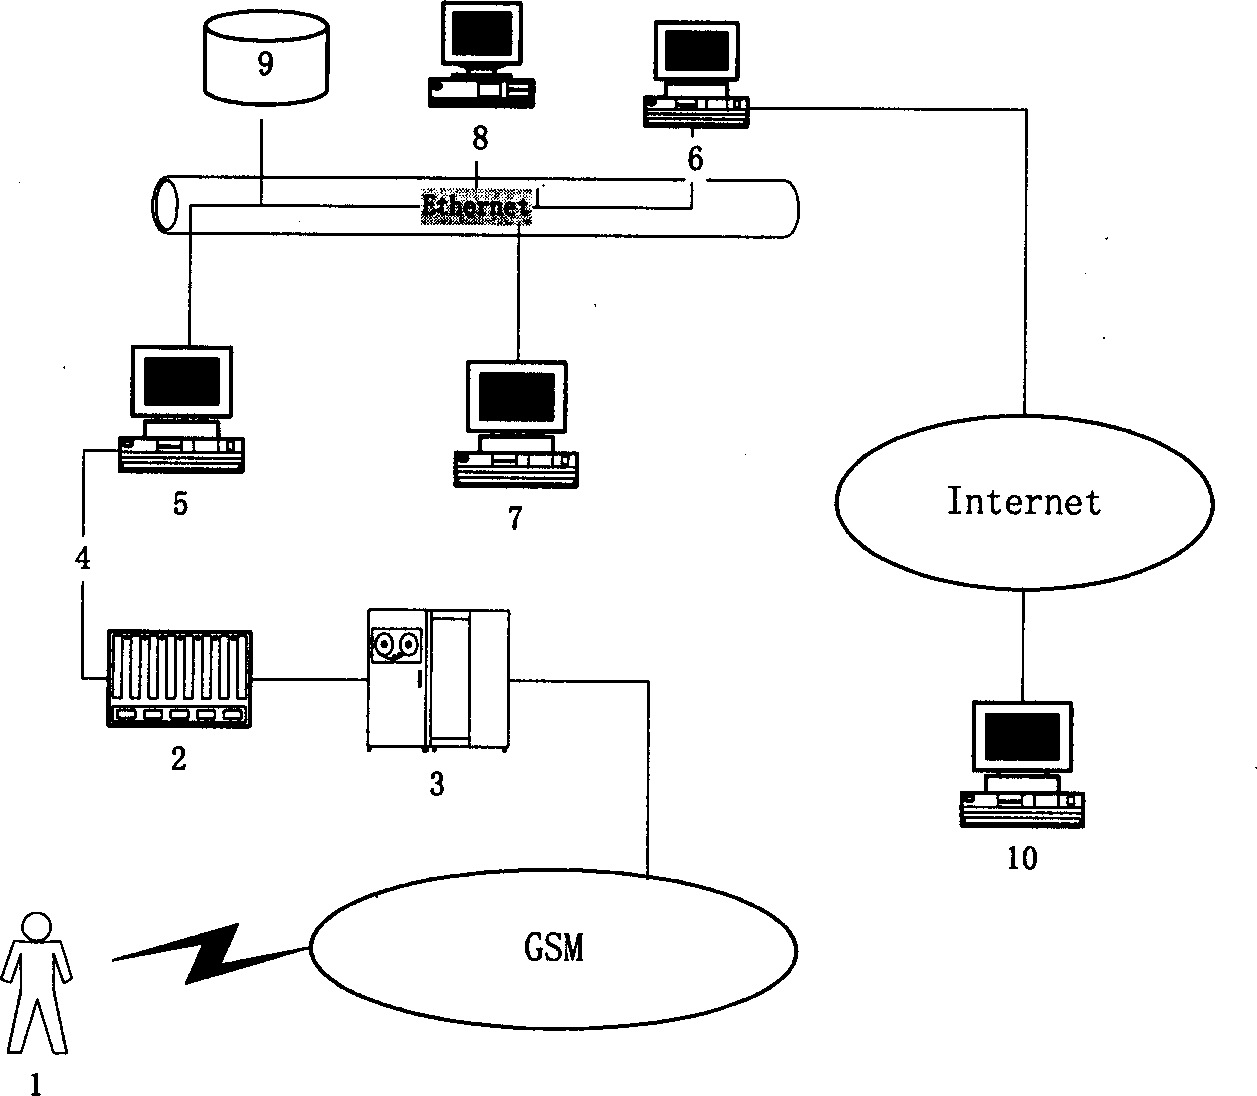 Radio e-business network system and its implementation